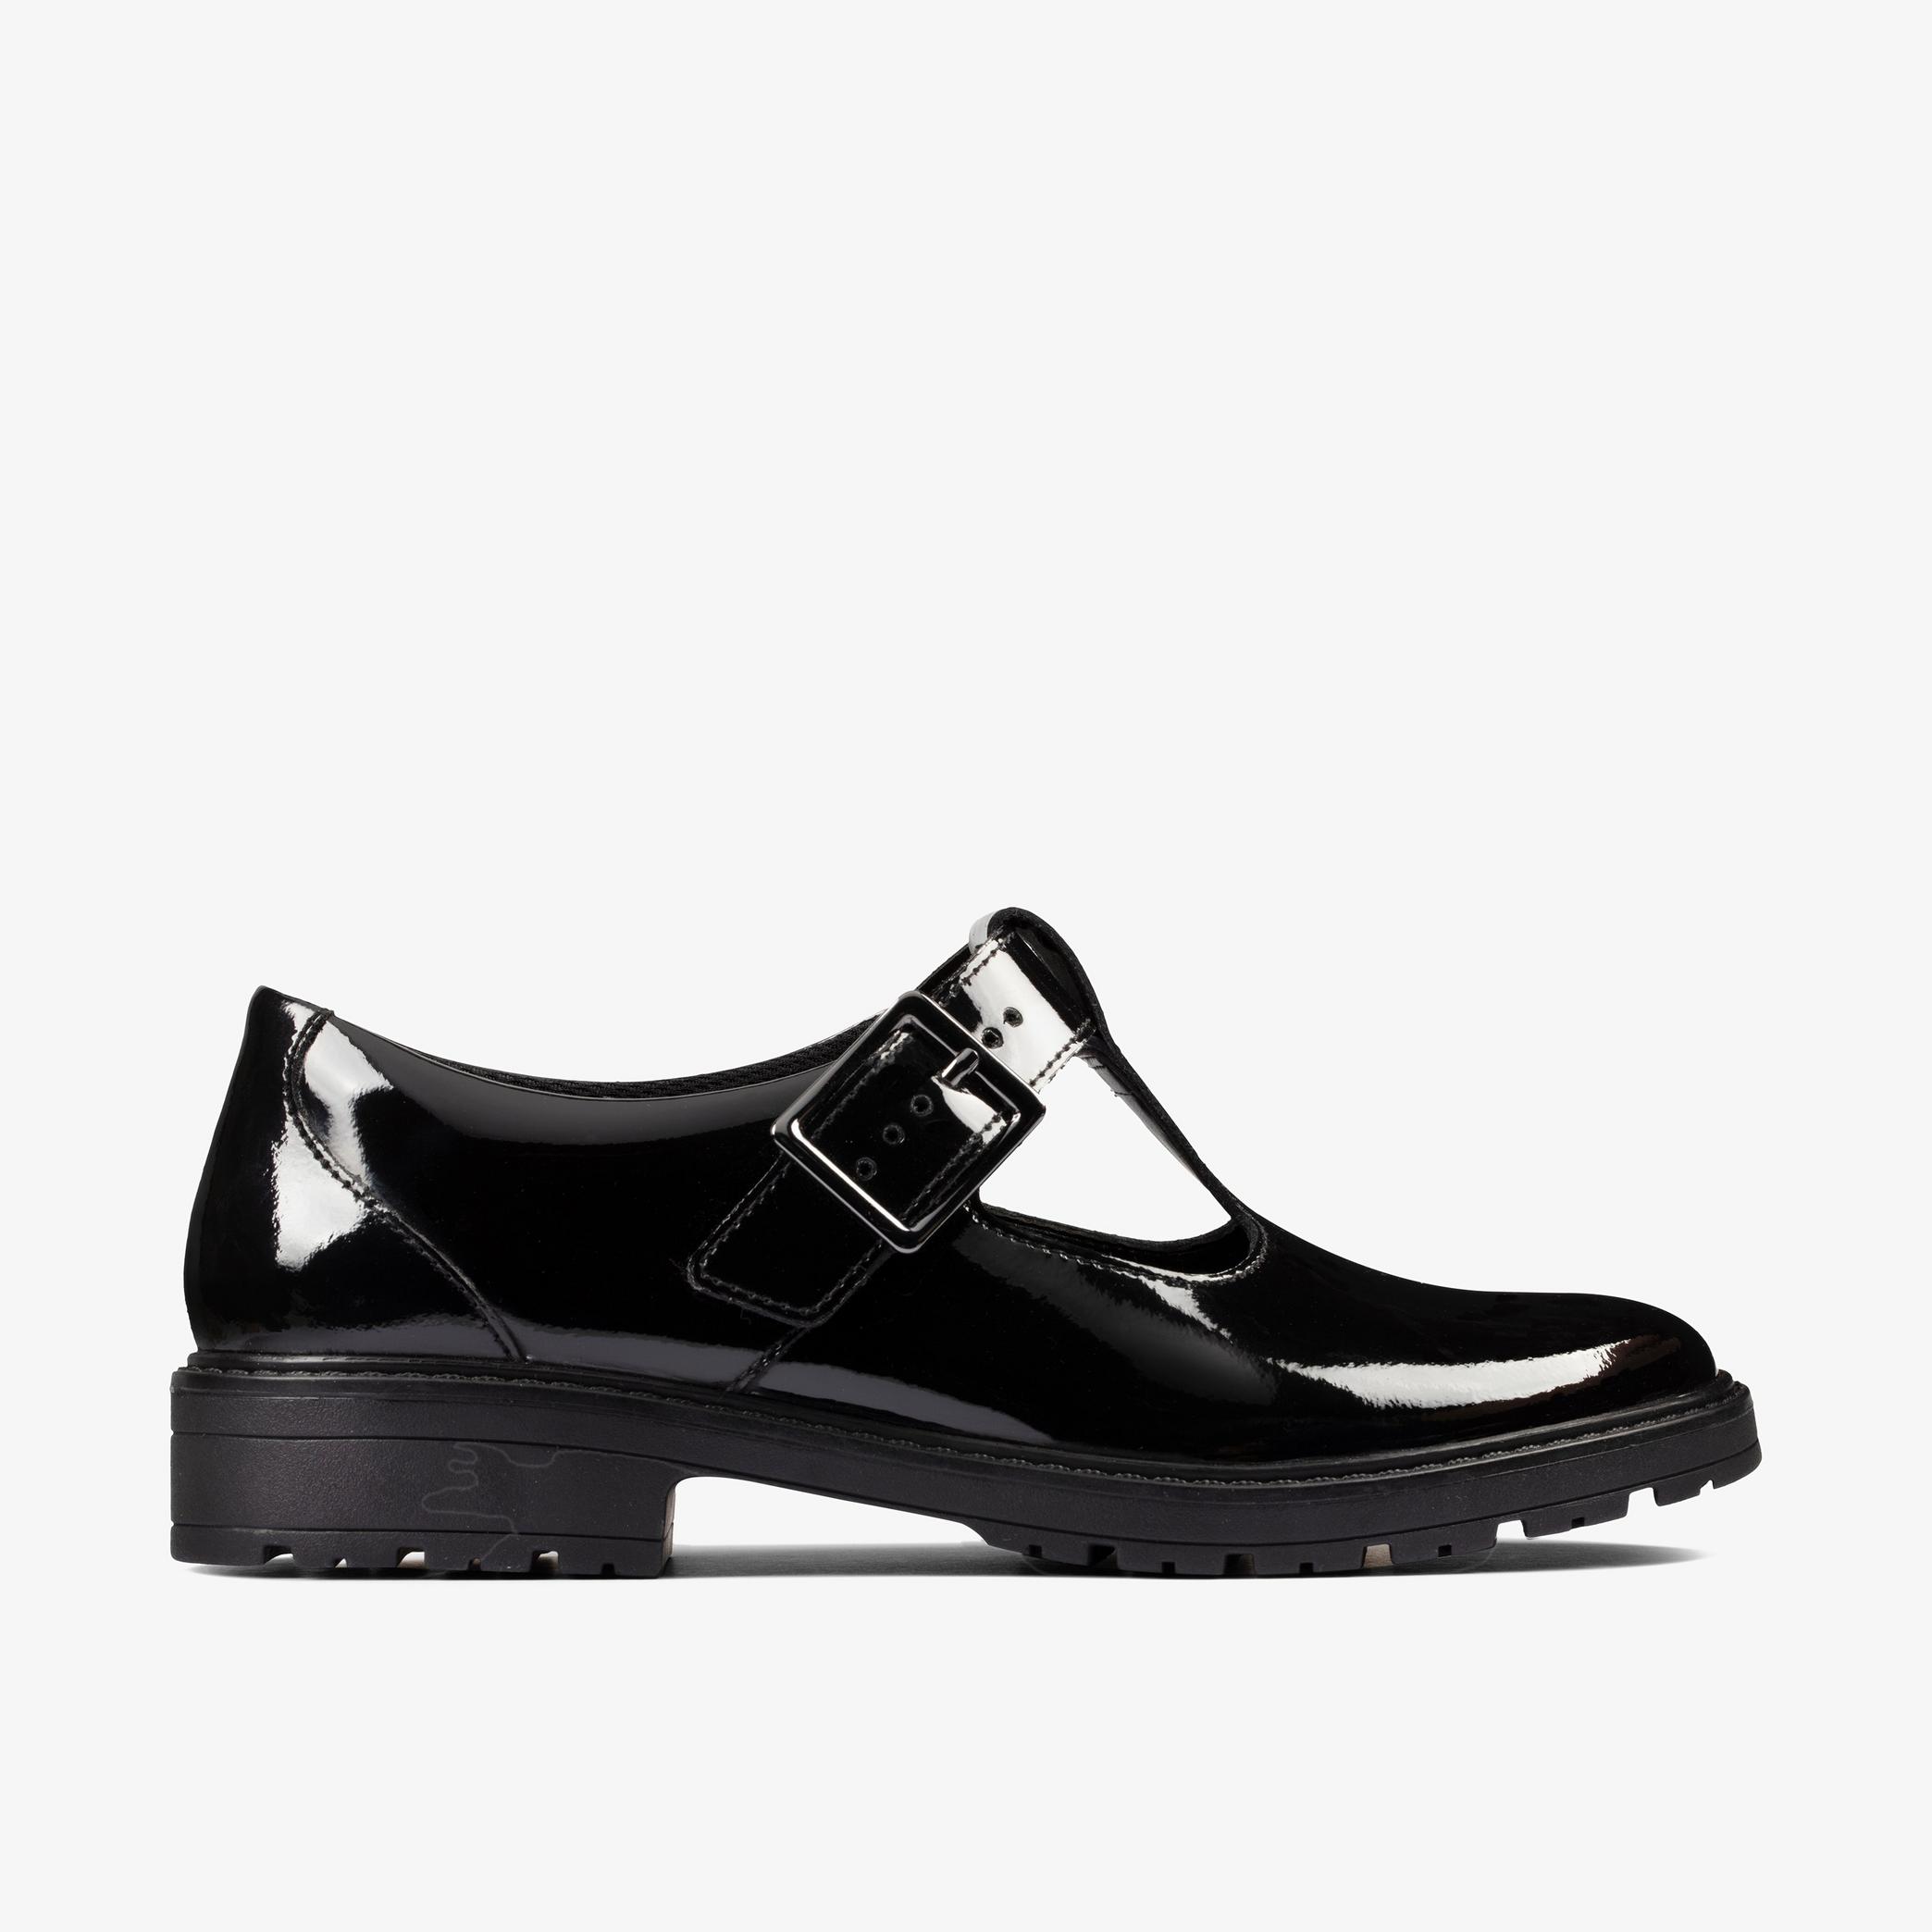 Loxham Shine Youth Black Patent Shoes, view 1 of 6